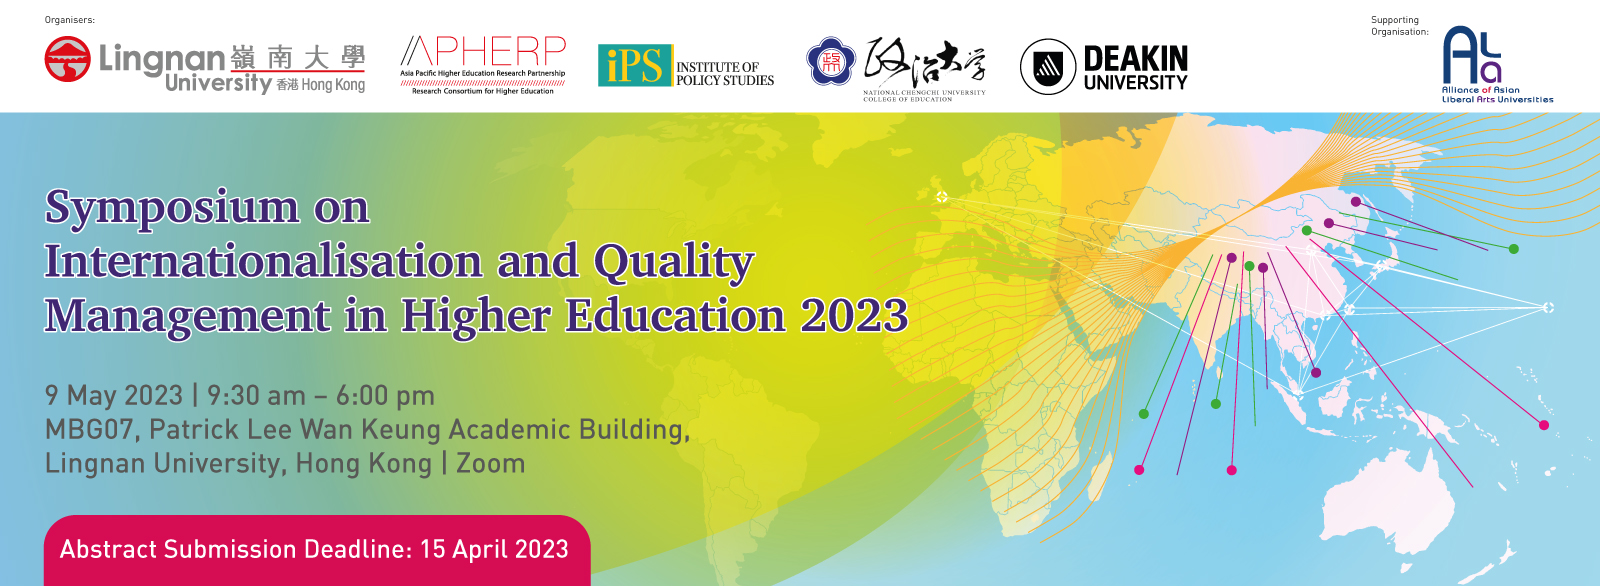 Symposium on Internationalisation and Quality Management in Higher Education 2023